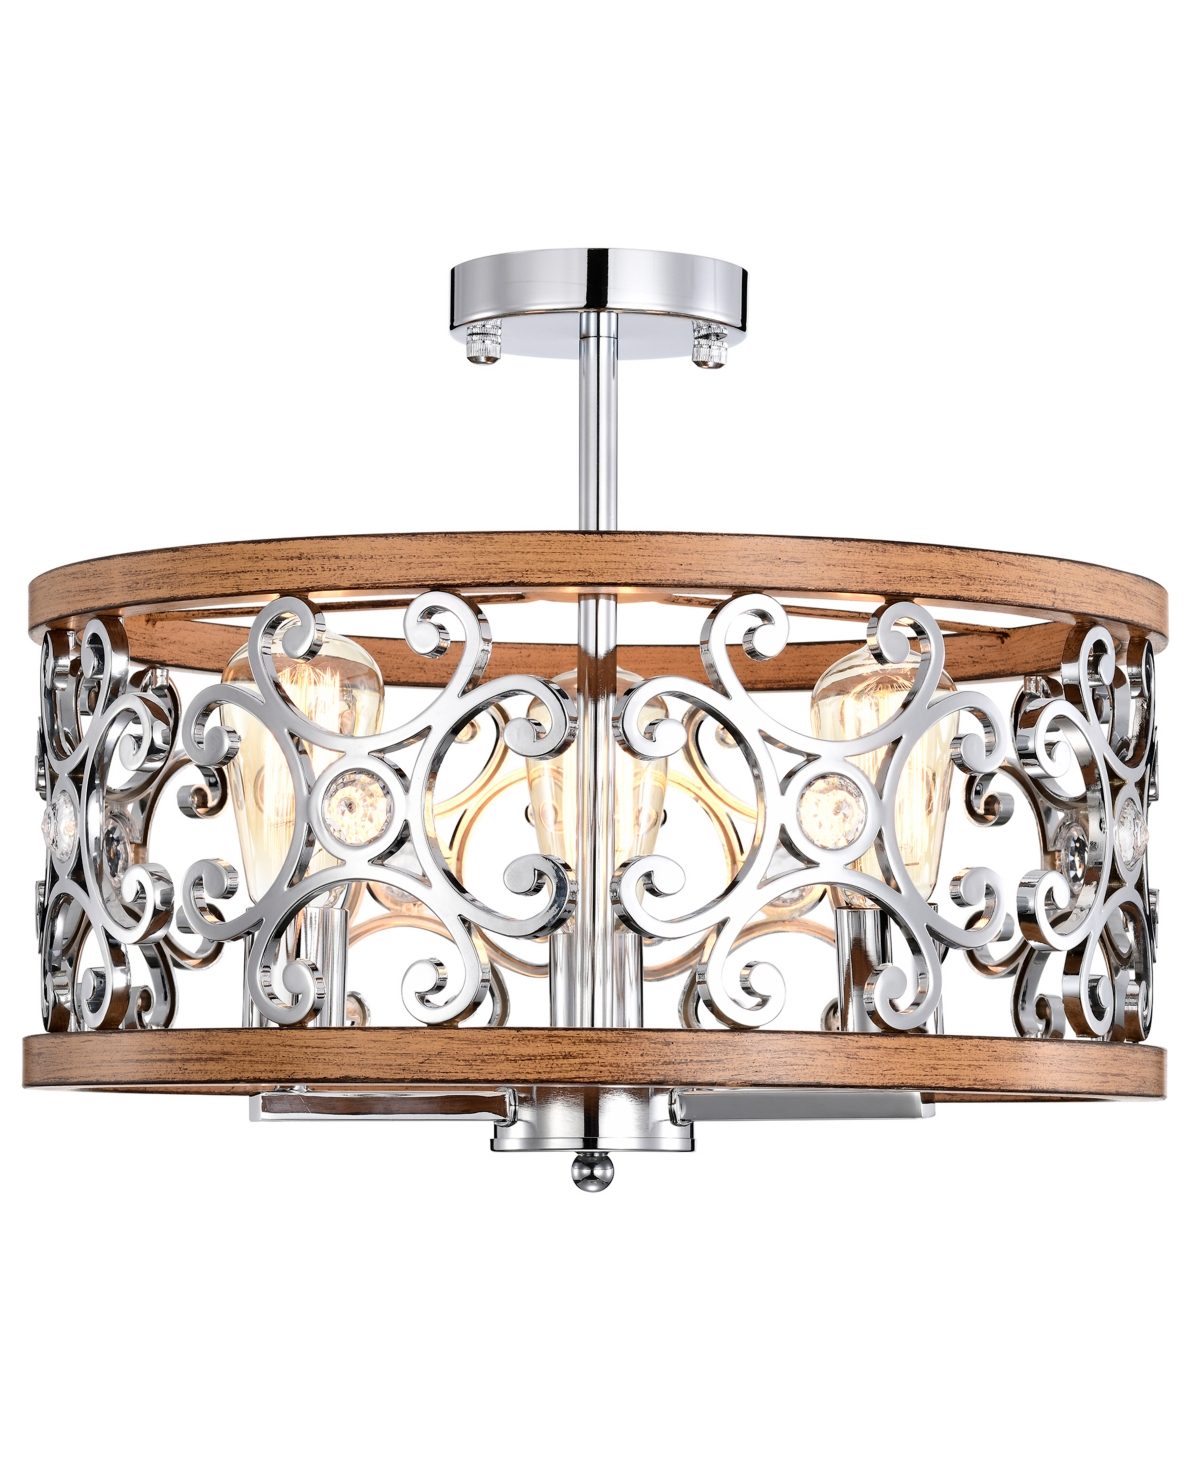 Home Accessories Sanne 18" Indoor Finish Semi-flush Mount Ceiling Light With Light Kit In Chrome And Faux Wood Grain